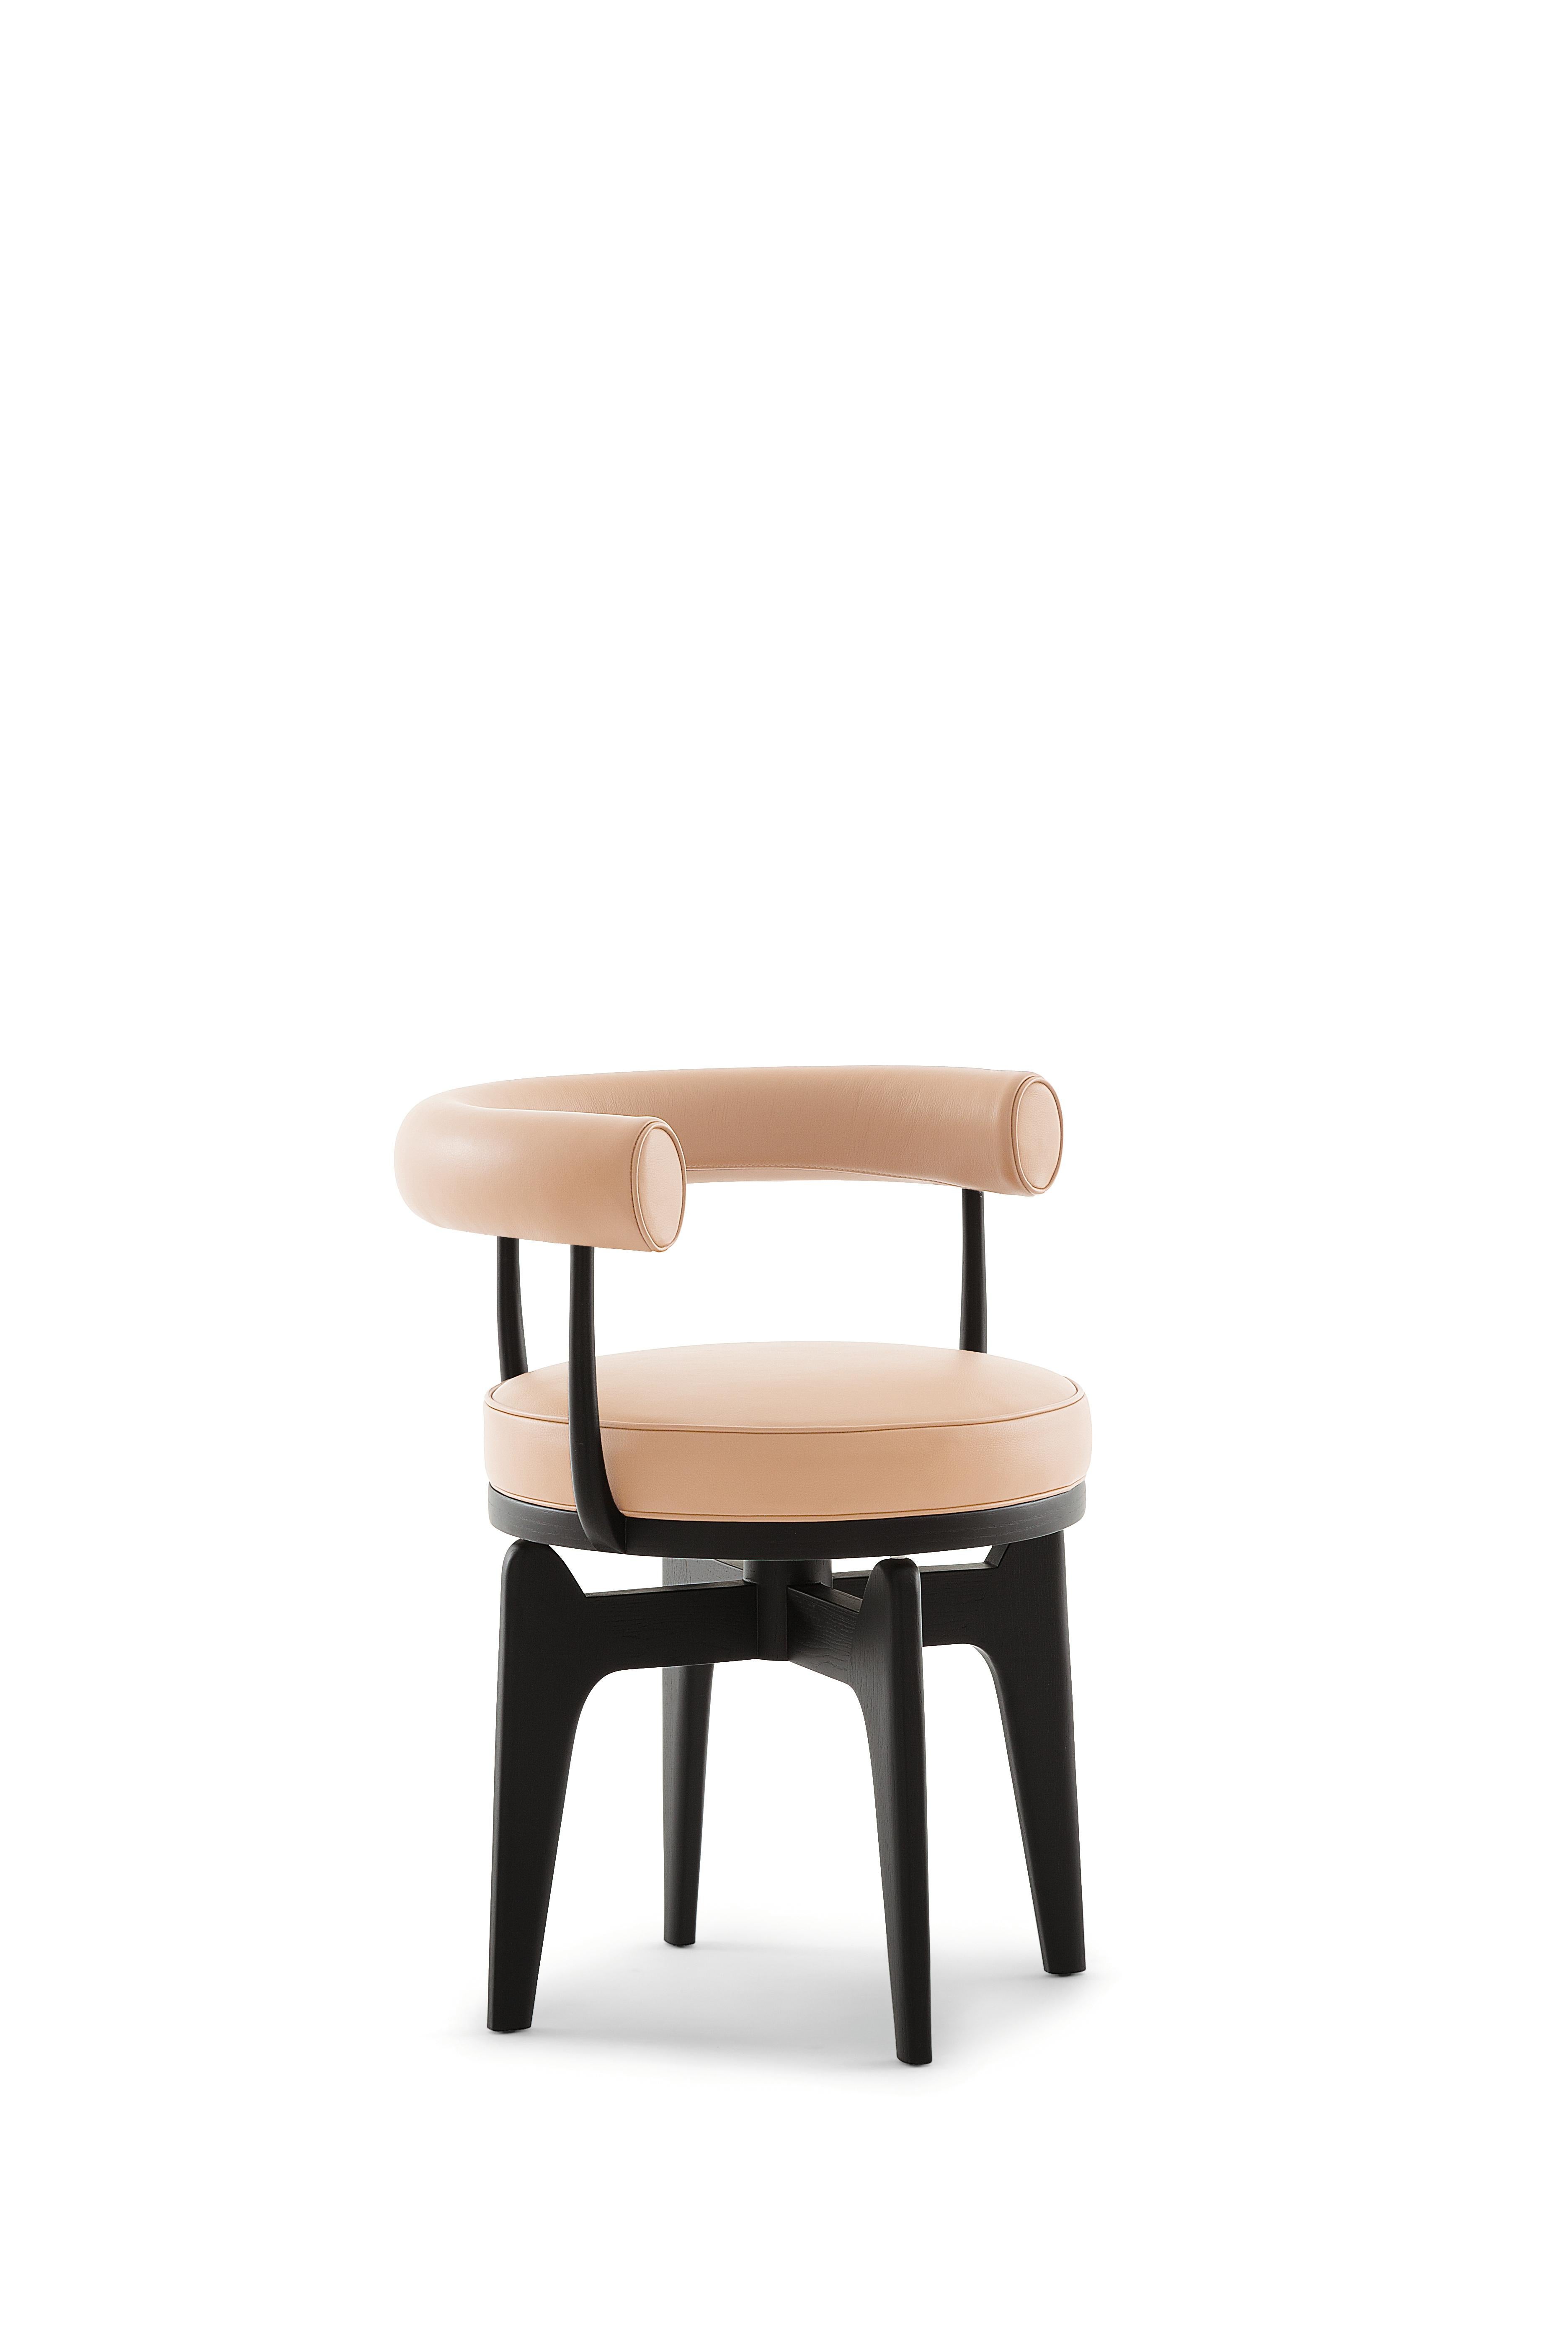 Mid-Century Modern Charlotte Perriand Fauteuil Indochine  en vente